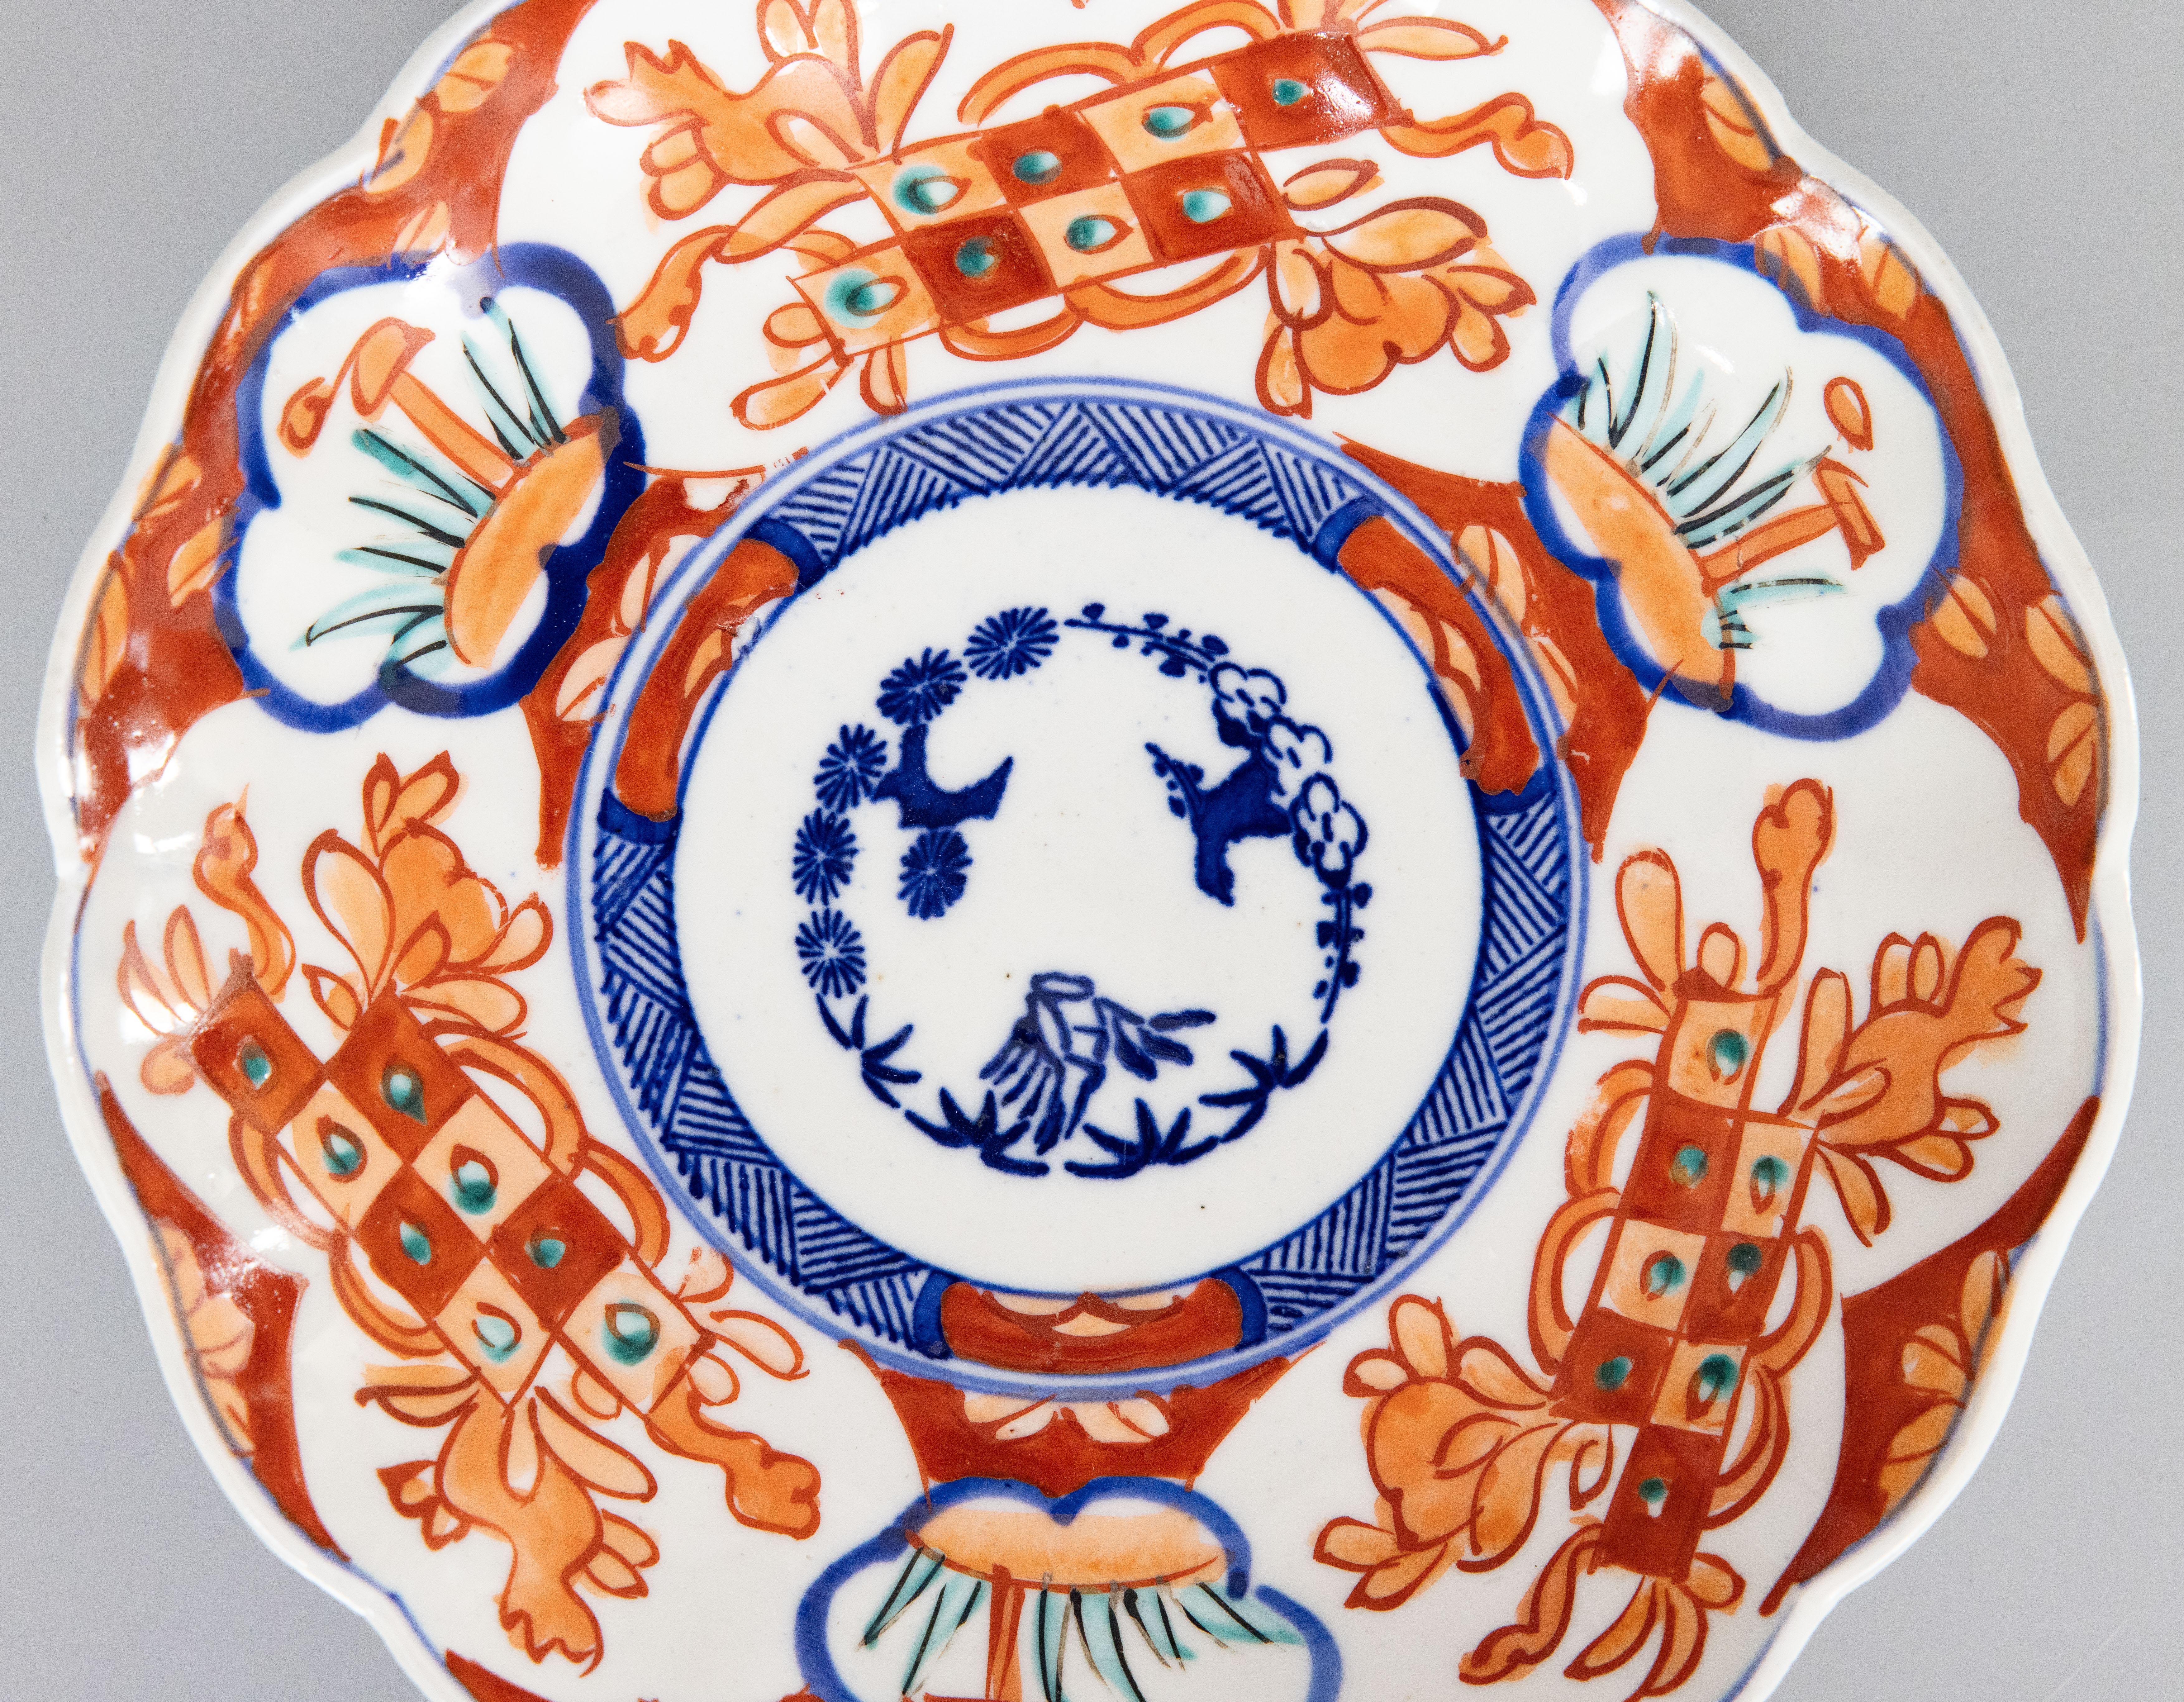 Wonderful 19th century antique Imari plate with scalloped edge. Featuring vibrant oranges, blues, and green.